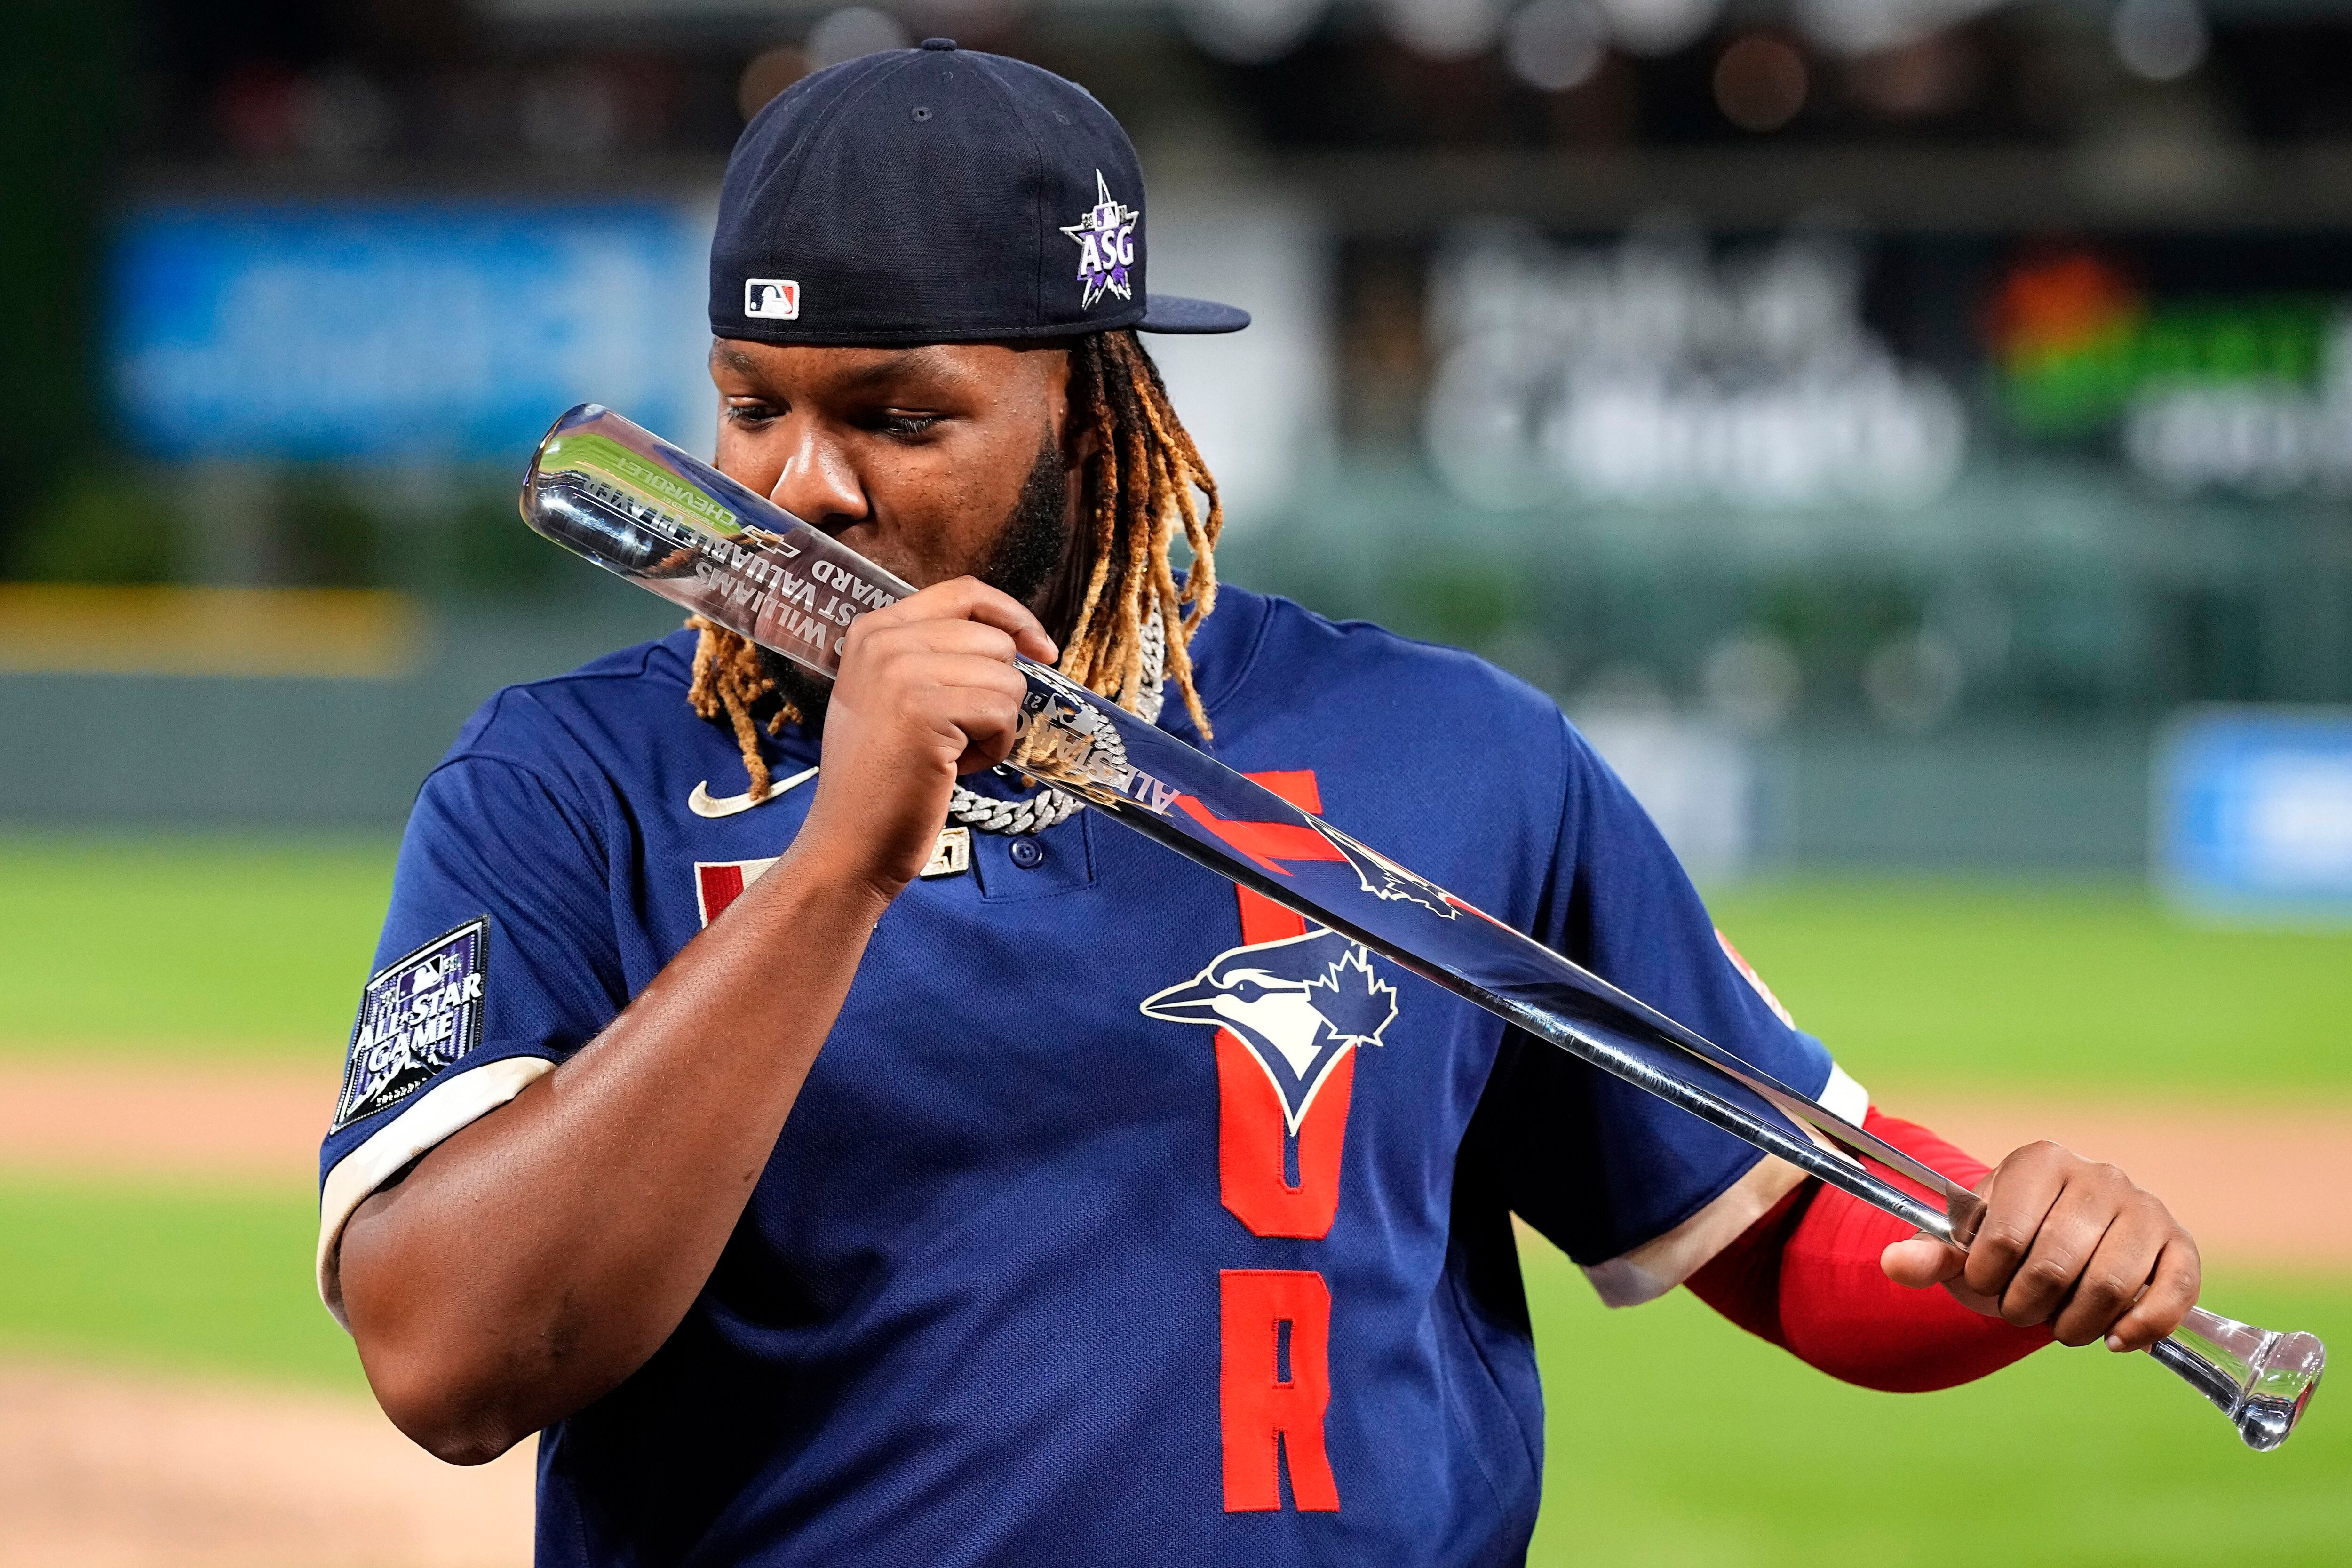 Like father, like son: Vladimir Guerrero Jr. follows in dad's footsteps